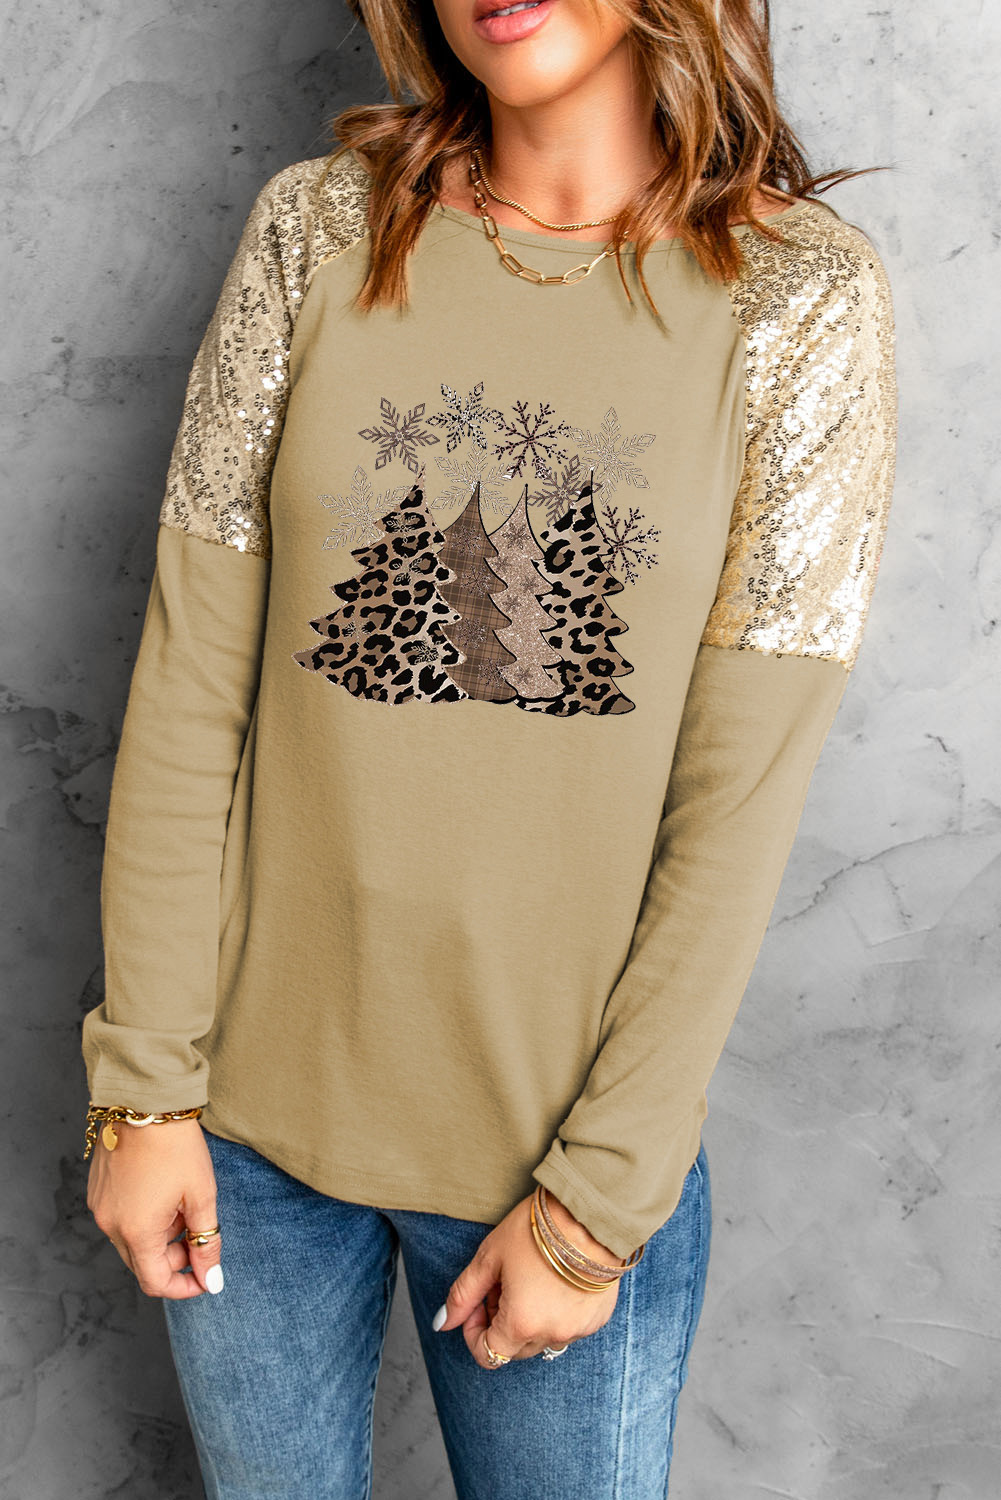 Apricot Leopard Christmas Tree Print Sequin Patchwork Pullover Shirt - (US 4-6)S